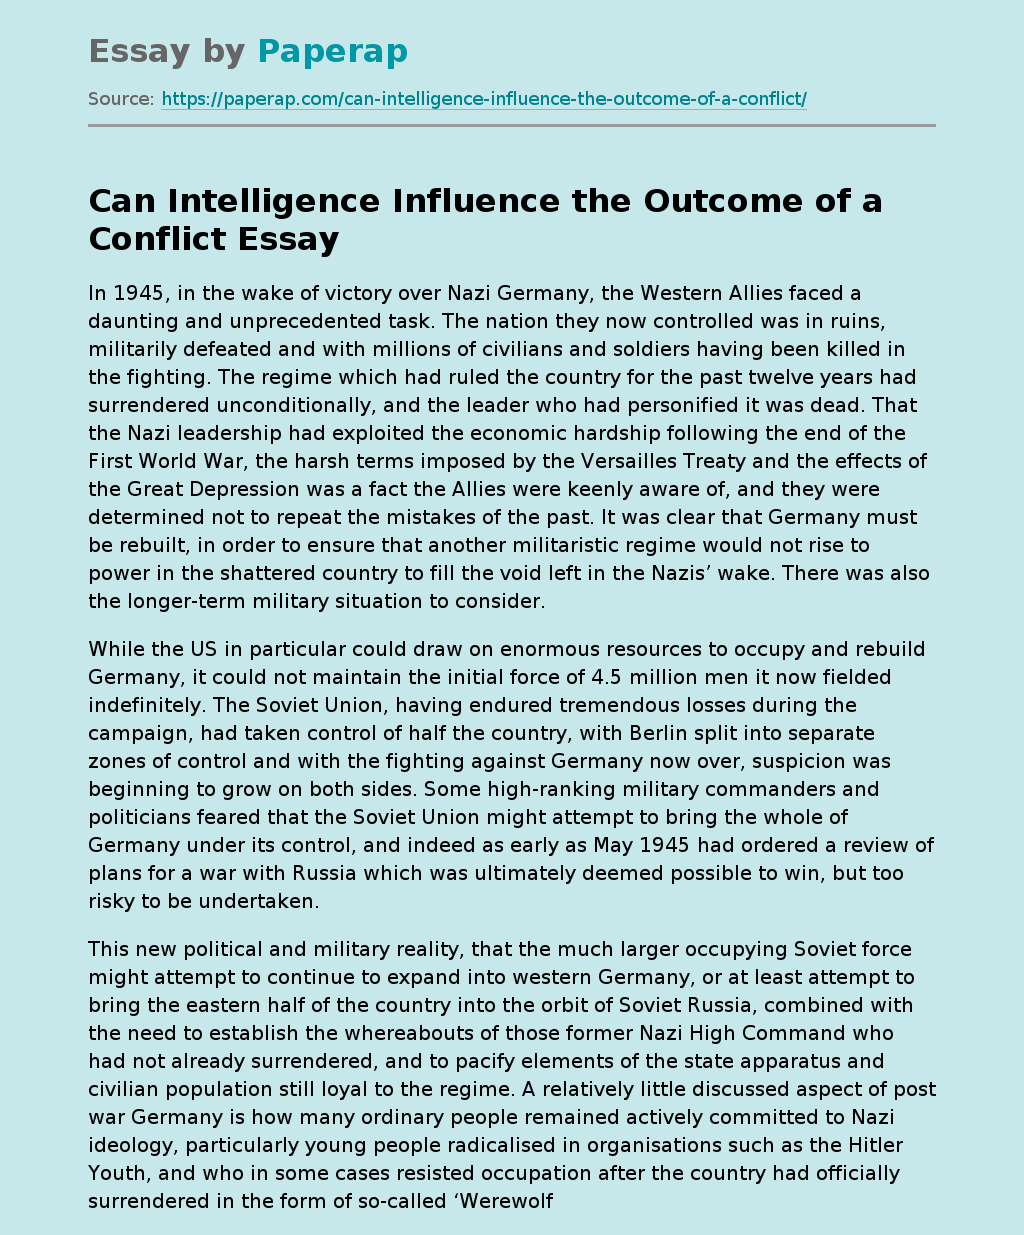 Can Intelligence Influence the Outcome of a Conflict